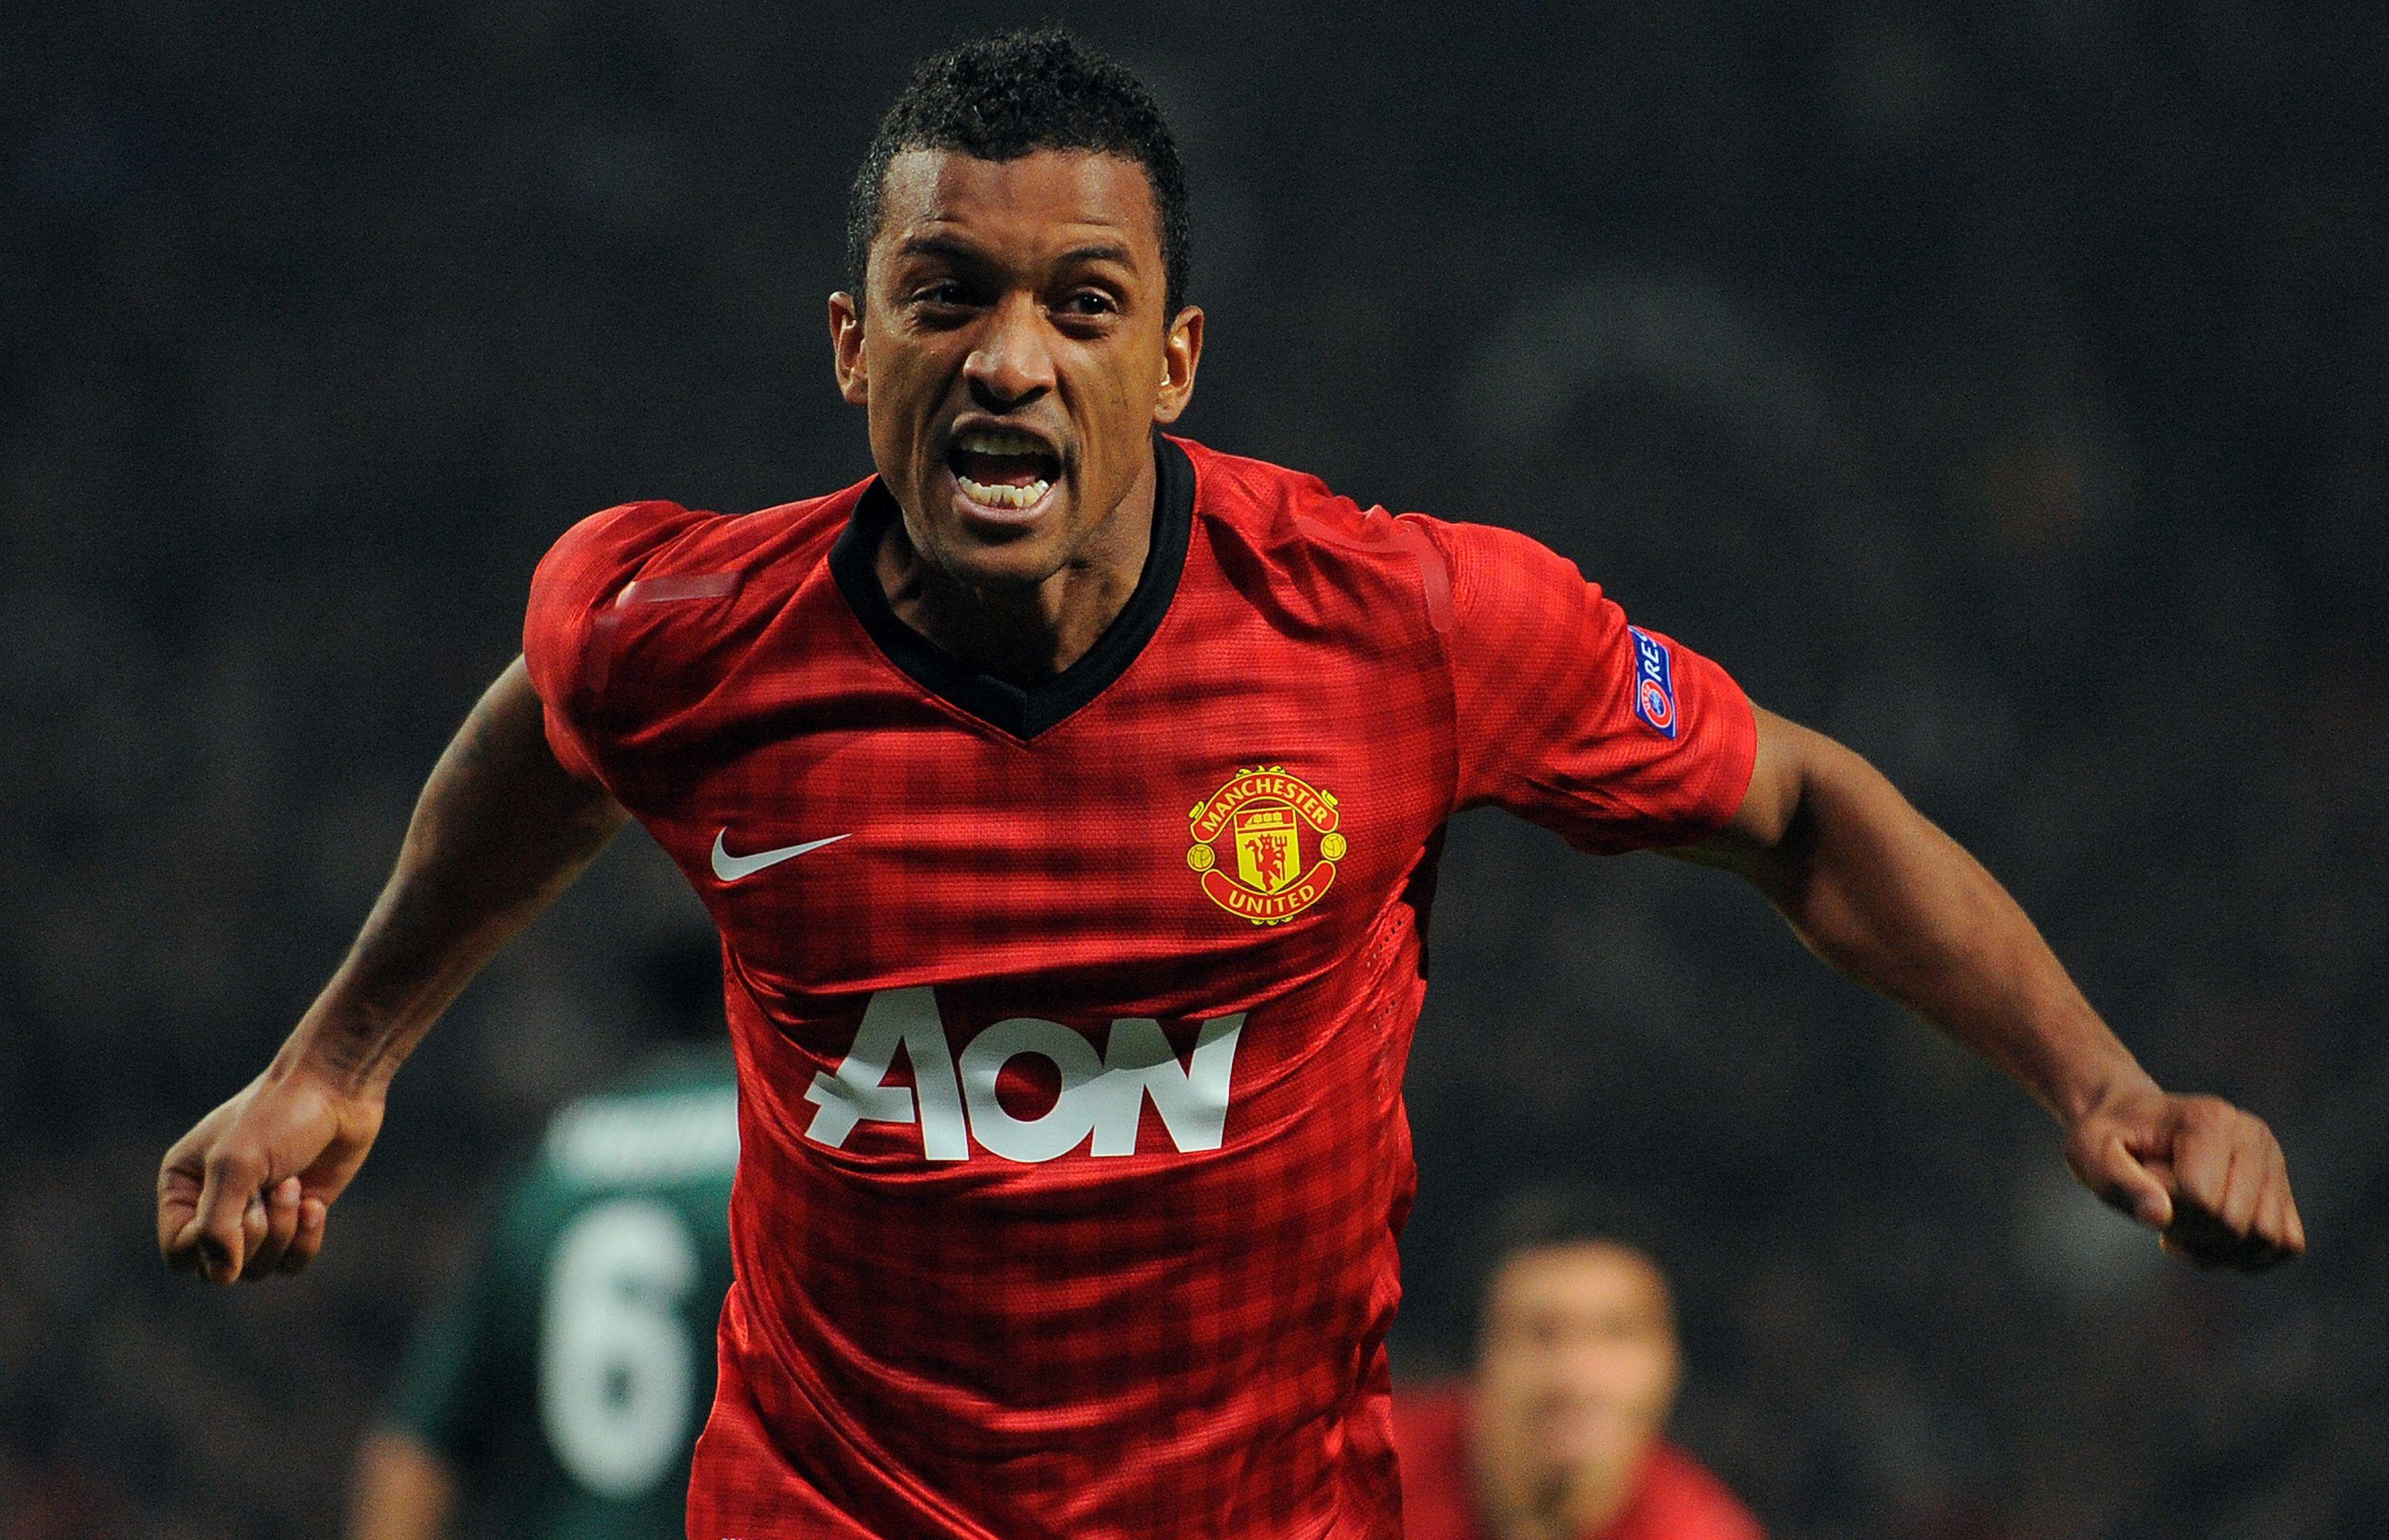 Manchester United Luis Nani scored a goal wallpaper and image